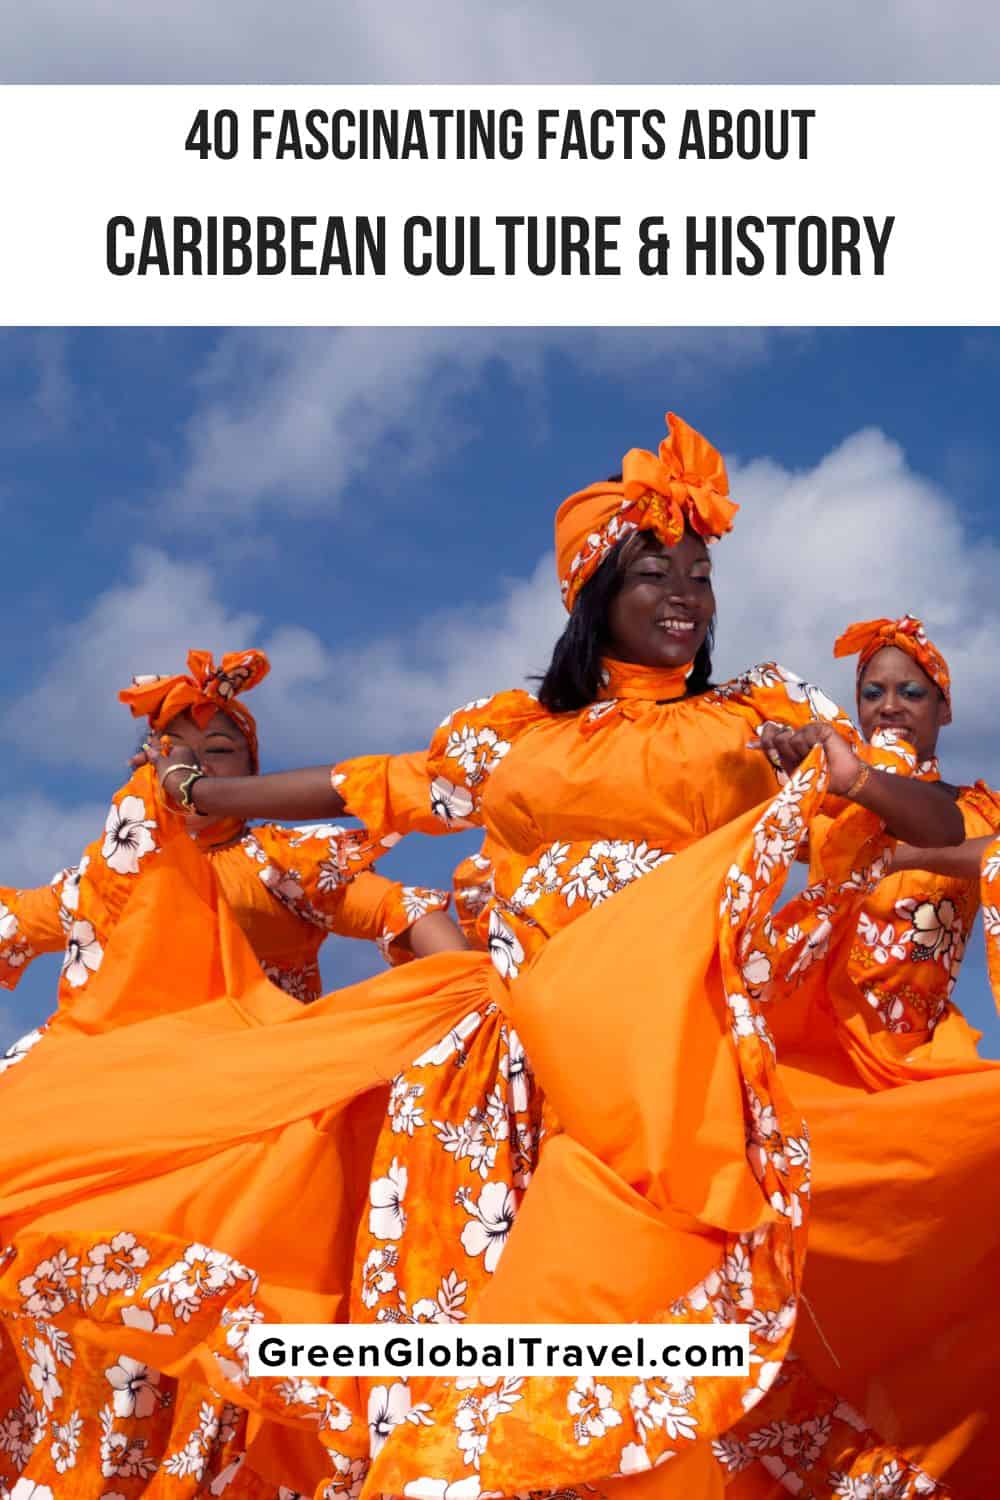 40 Fun Facts About Caribbean Culture and History, including the rich traditions that make each Caribbean island unique.  |  |  Caribbean culture |  Caribbean culture |  aruba culture |  Turks and the culture of Caicos |  Turks and the culture of Caicos |  principles of Caribbean culture |  Turks and the culture of Caicos |  facts about Caribbean culture |  What is Caribbean culture?